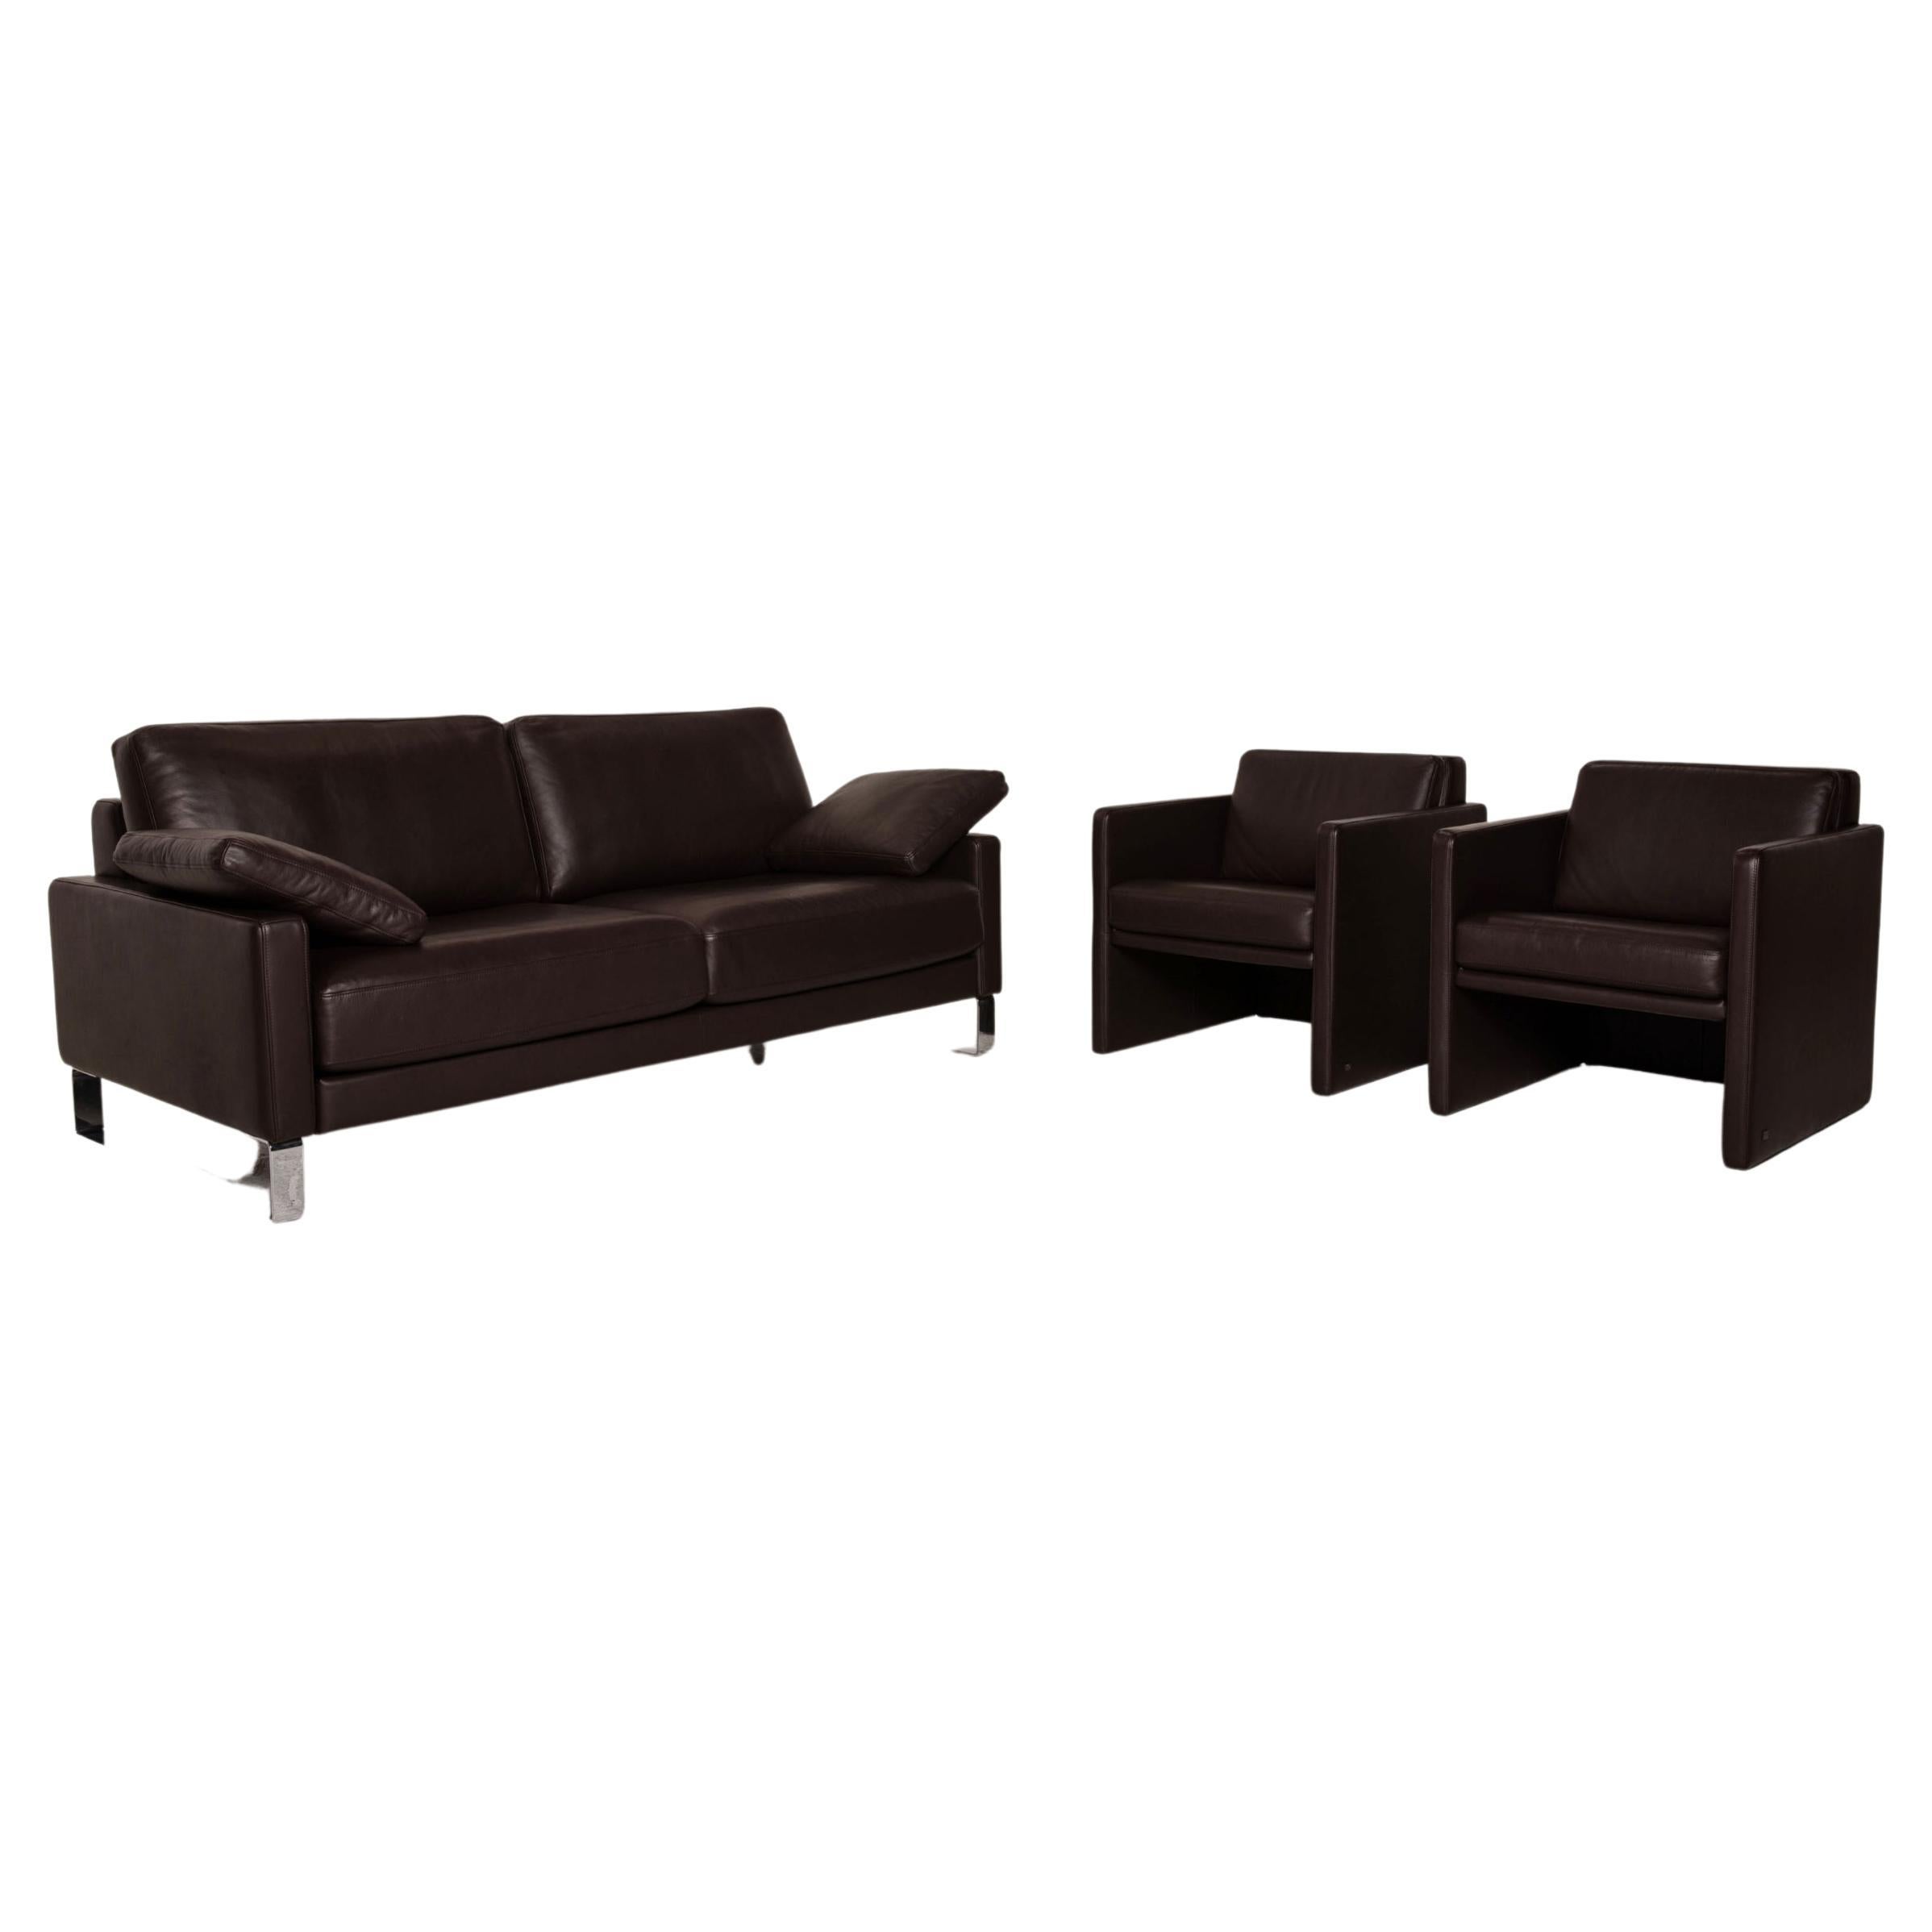 Rolf Benz Ego Leather Sofa Set Dark Brown Two-Seater 2x Armchairs Couch For Sale